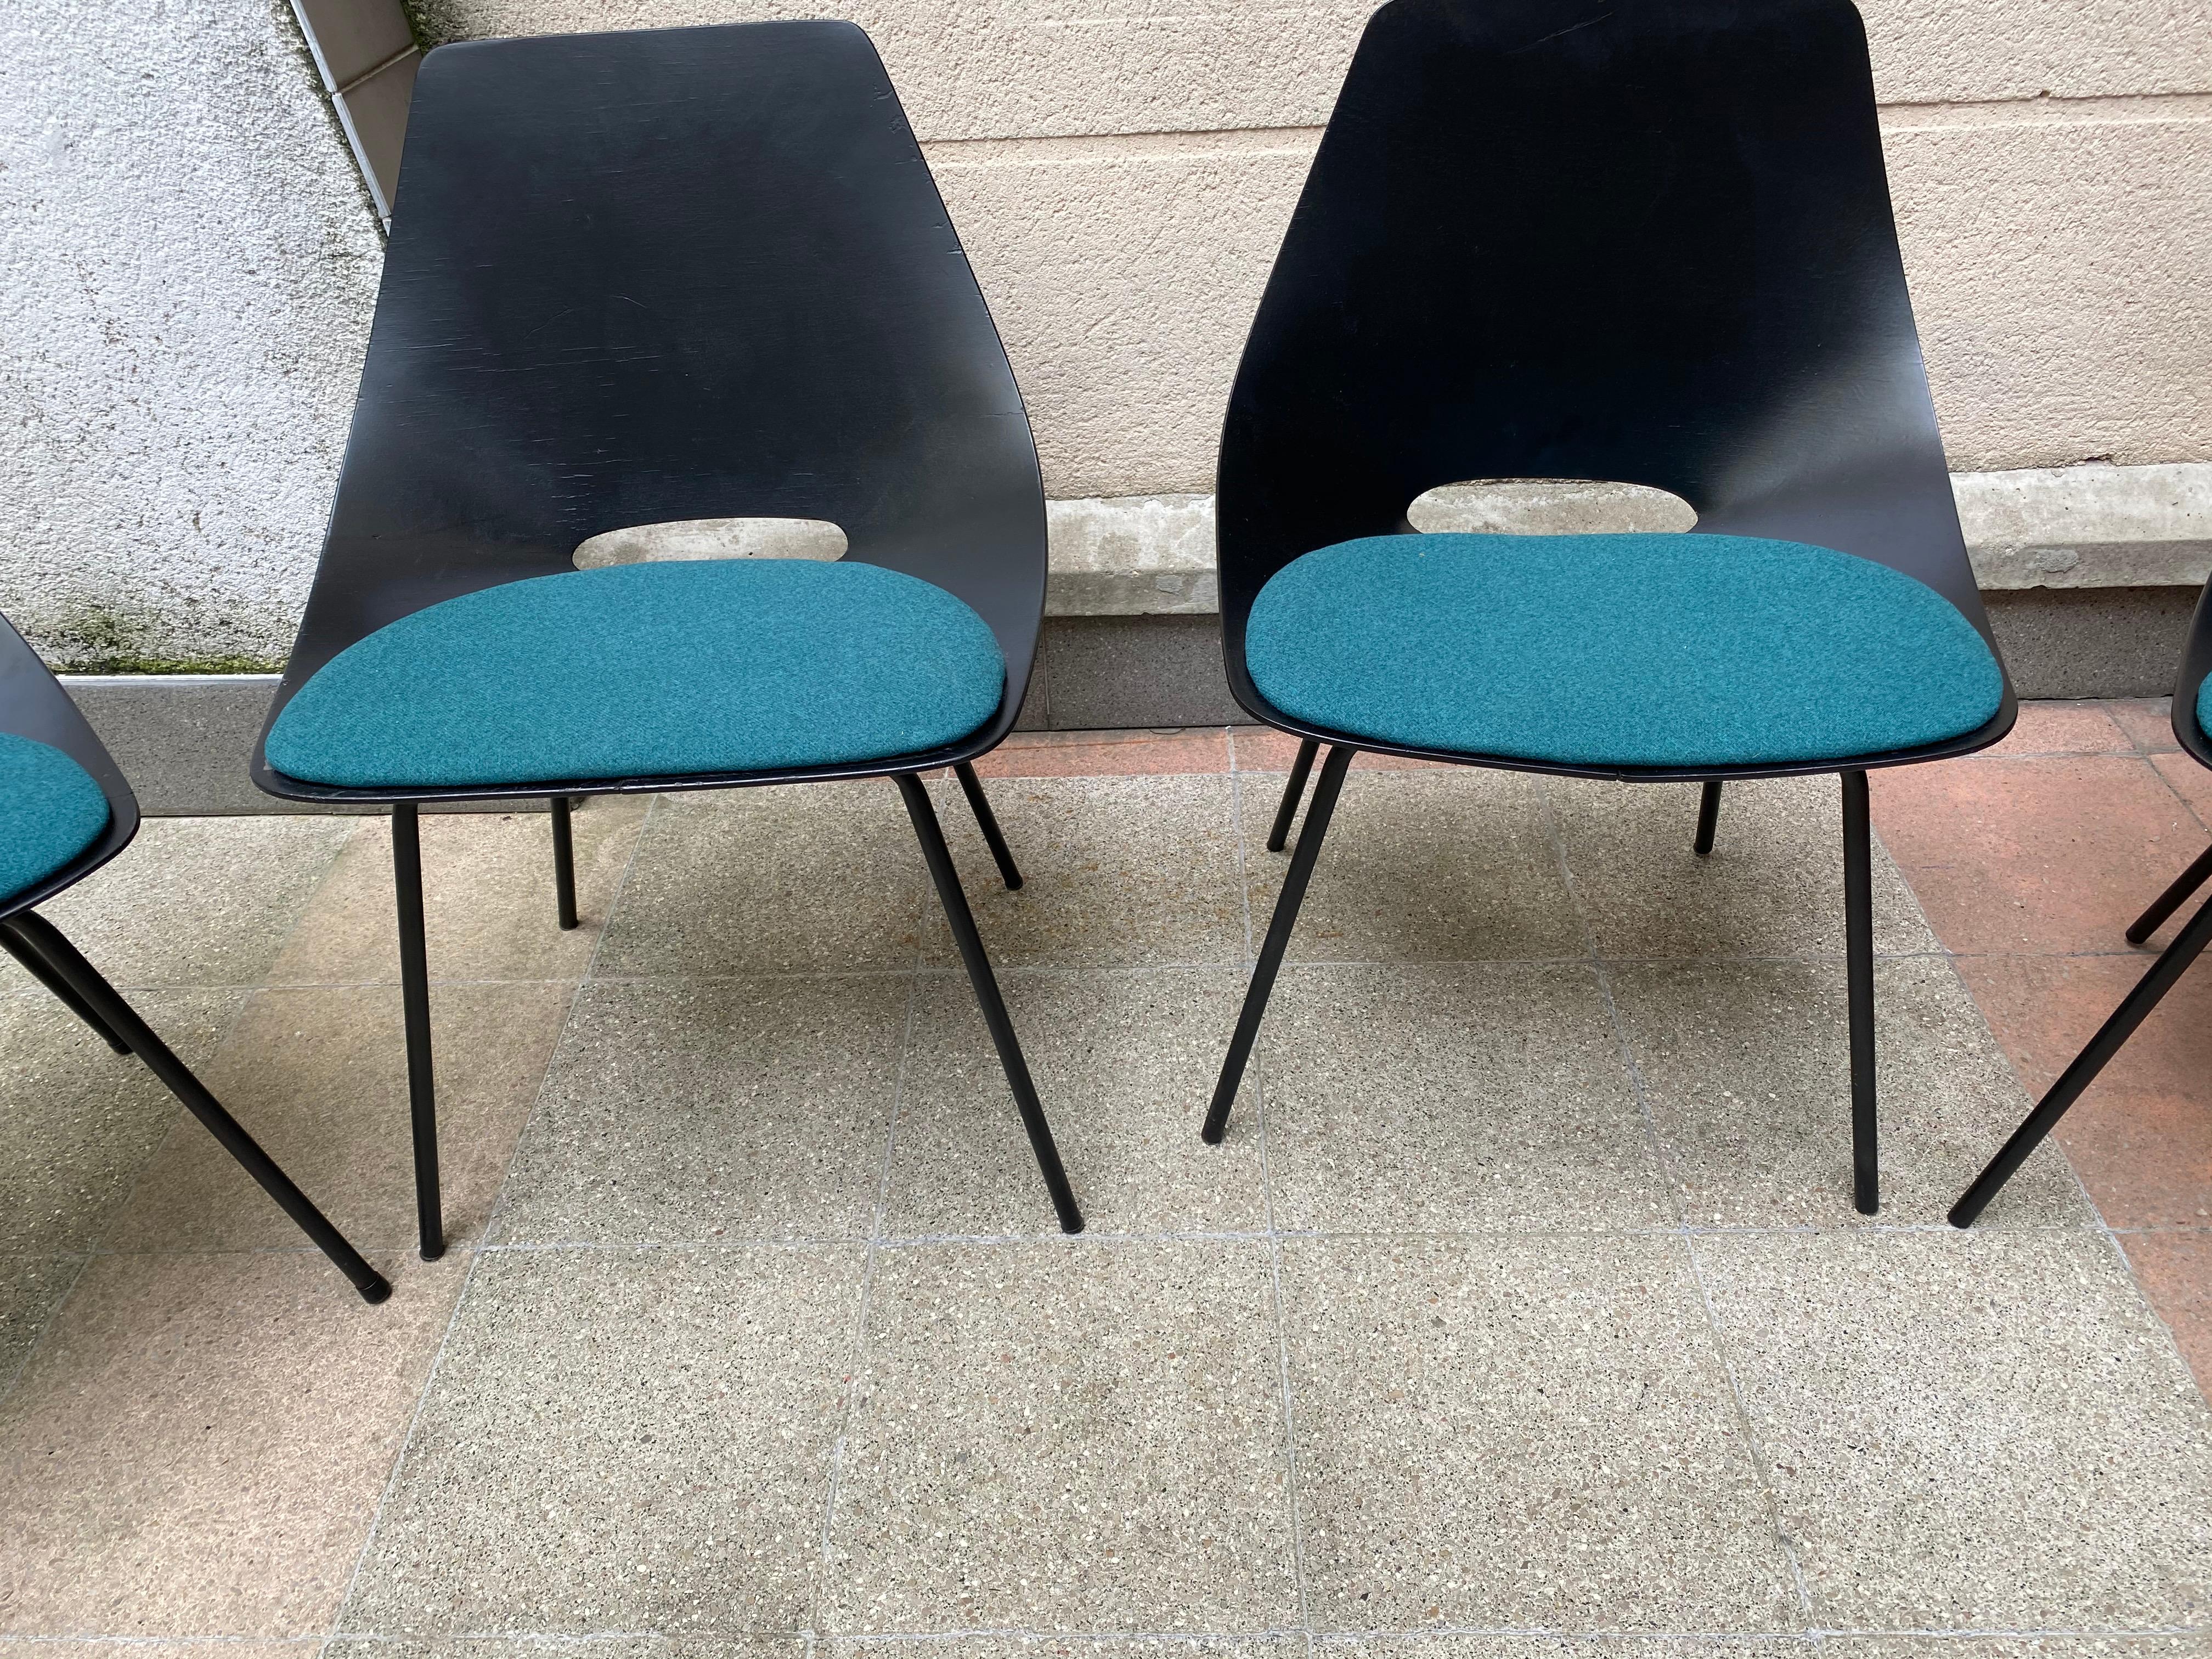 Pierre Guariche
Set of 4 chairs model Tonneau
Black stained wood, black lacquered metal and blue qvadrat fabric
Steiner Edition,
circa 1955
Measures: H 77 x W 52 x D 47
From the collection pierre Bergé
Restored to new
1600 Euros the 4
2